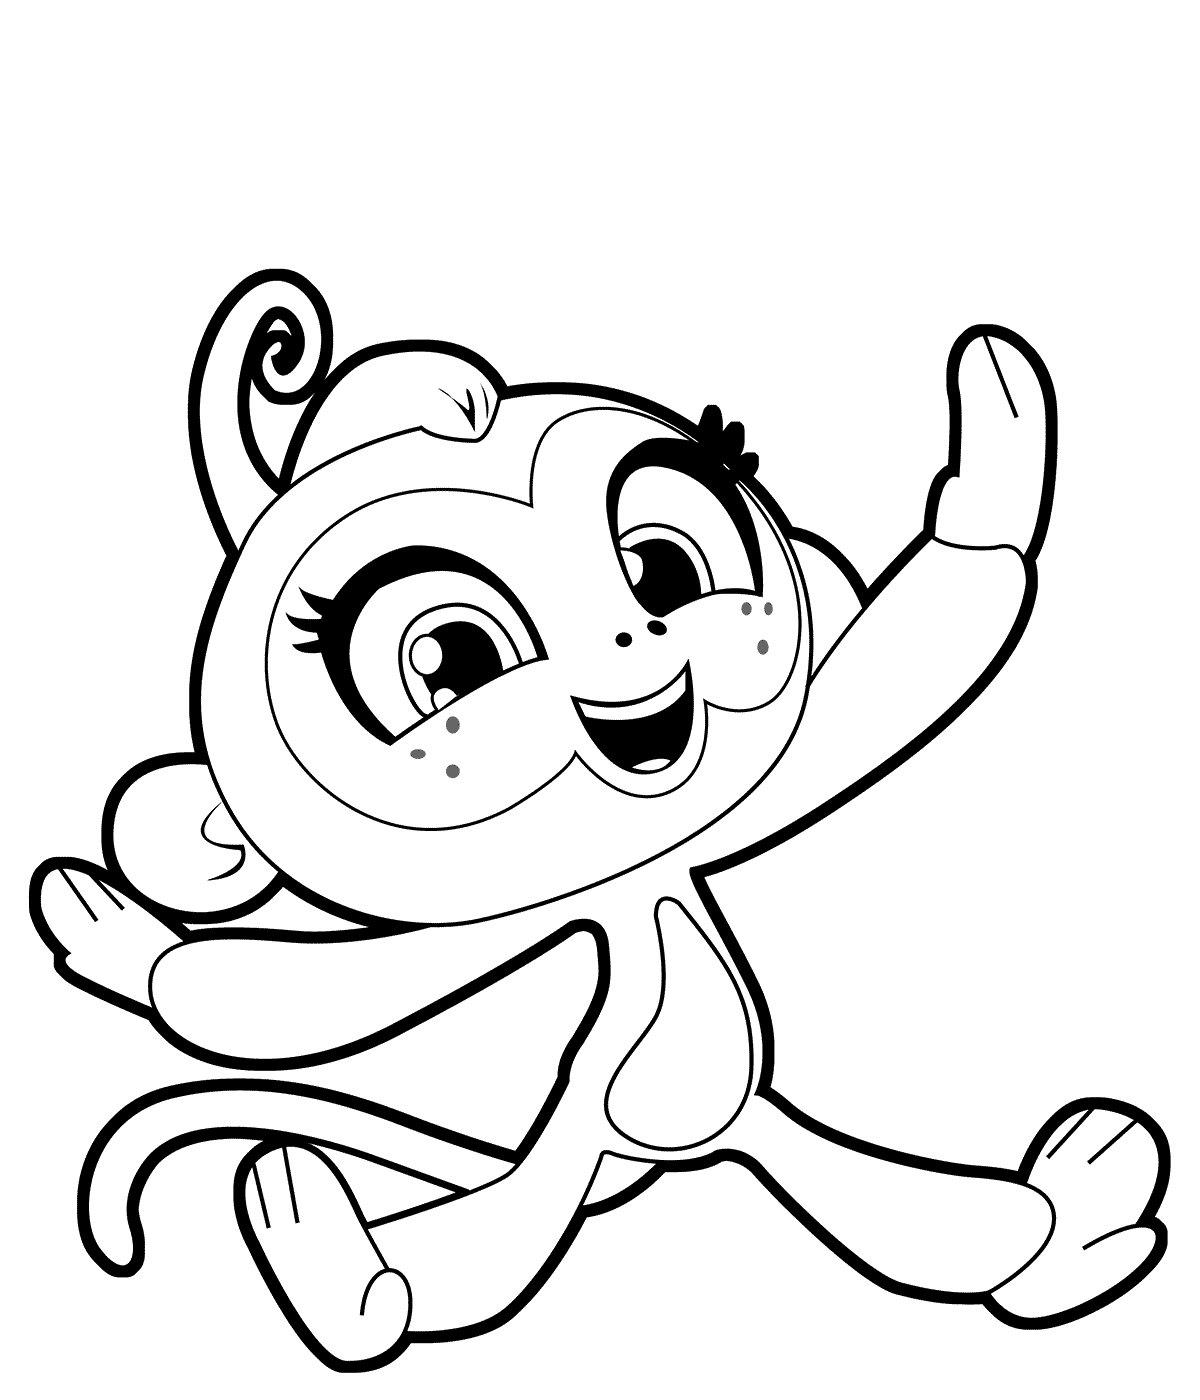 Fingerlings Coloring Pages - Best Coloring Pages For Kids